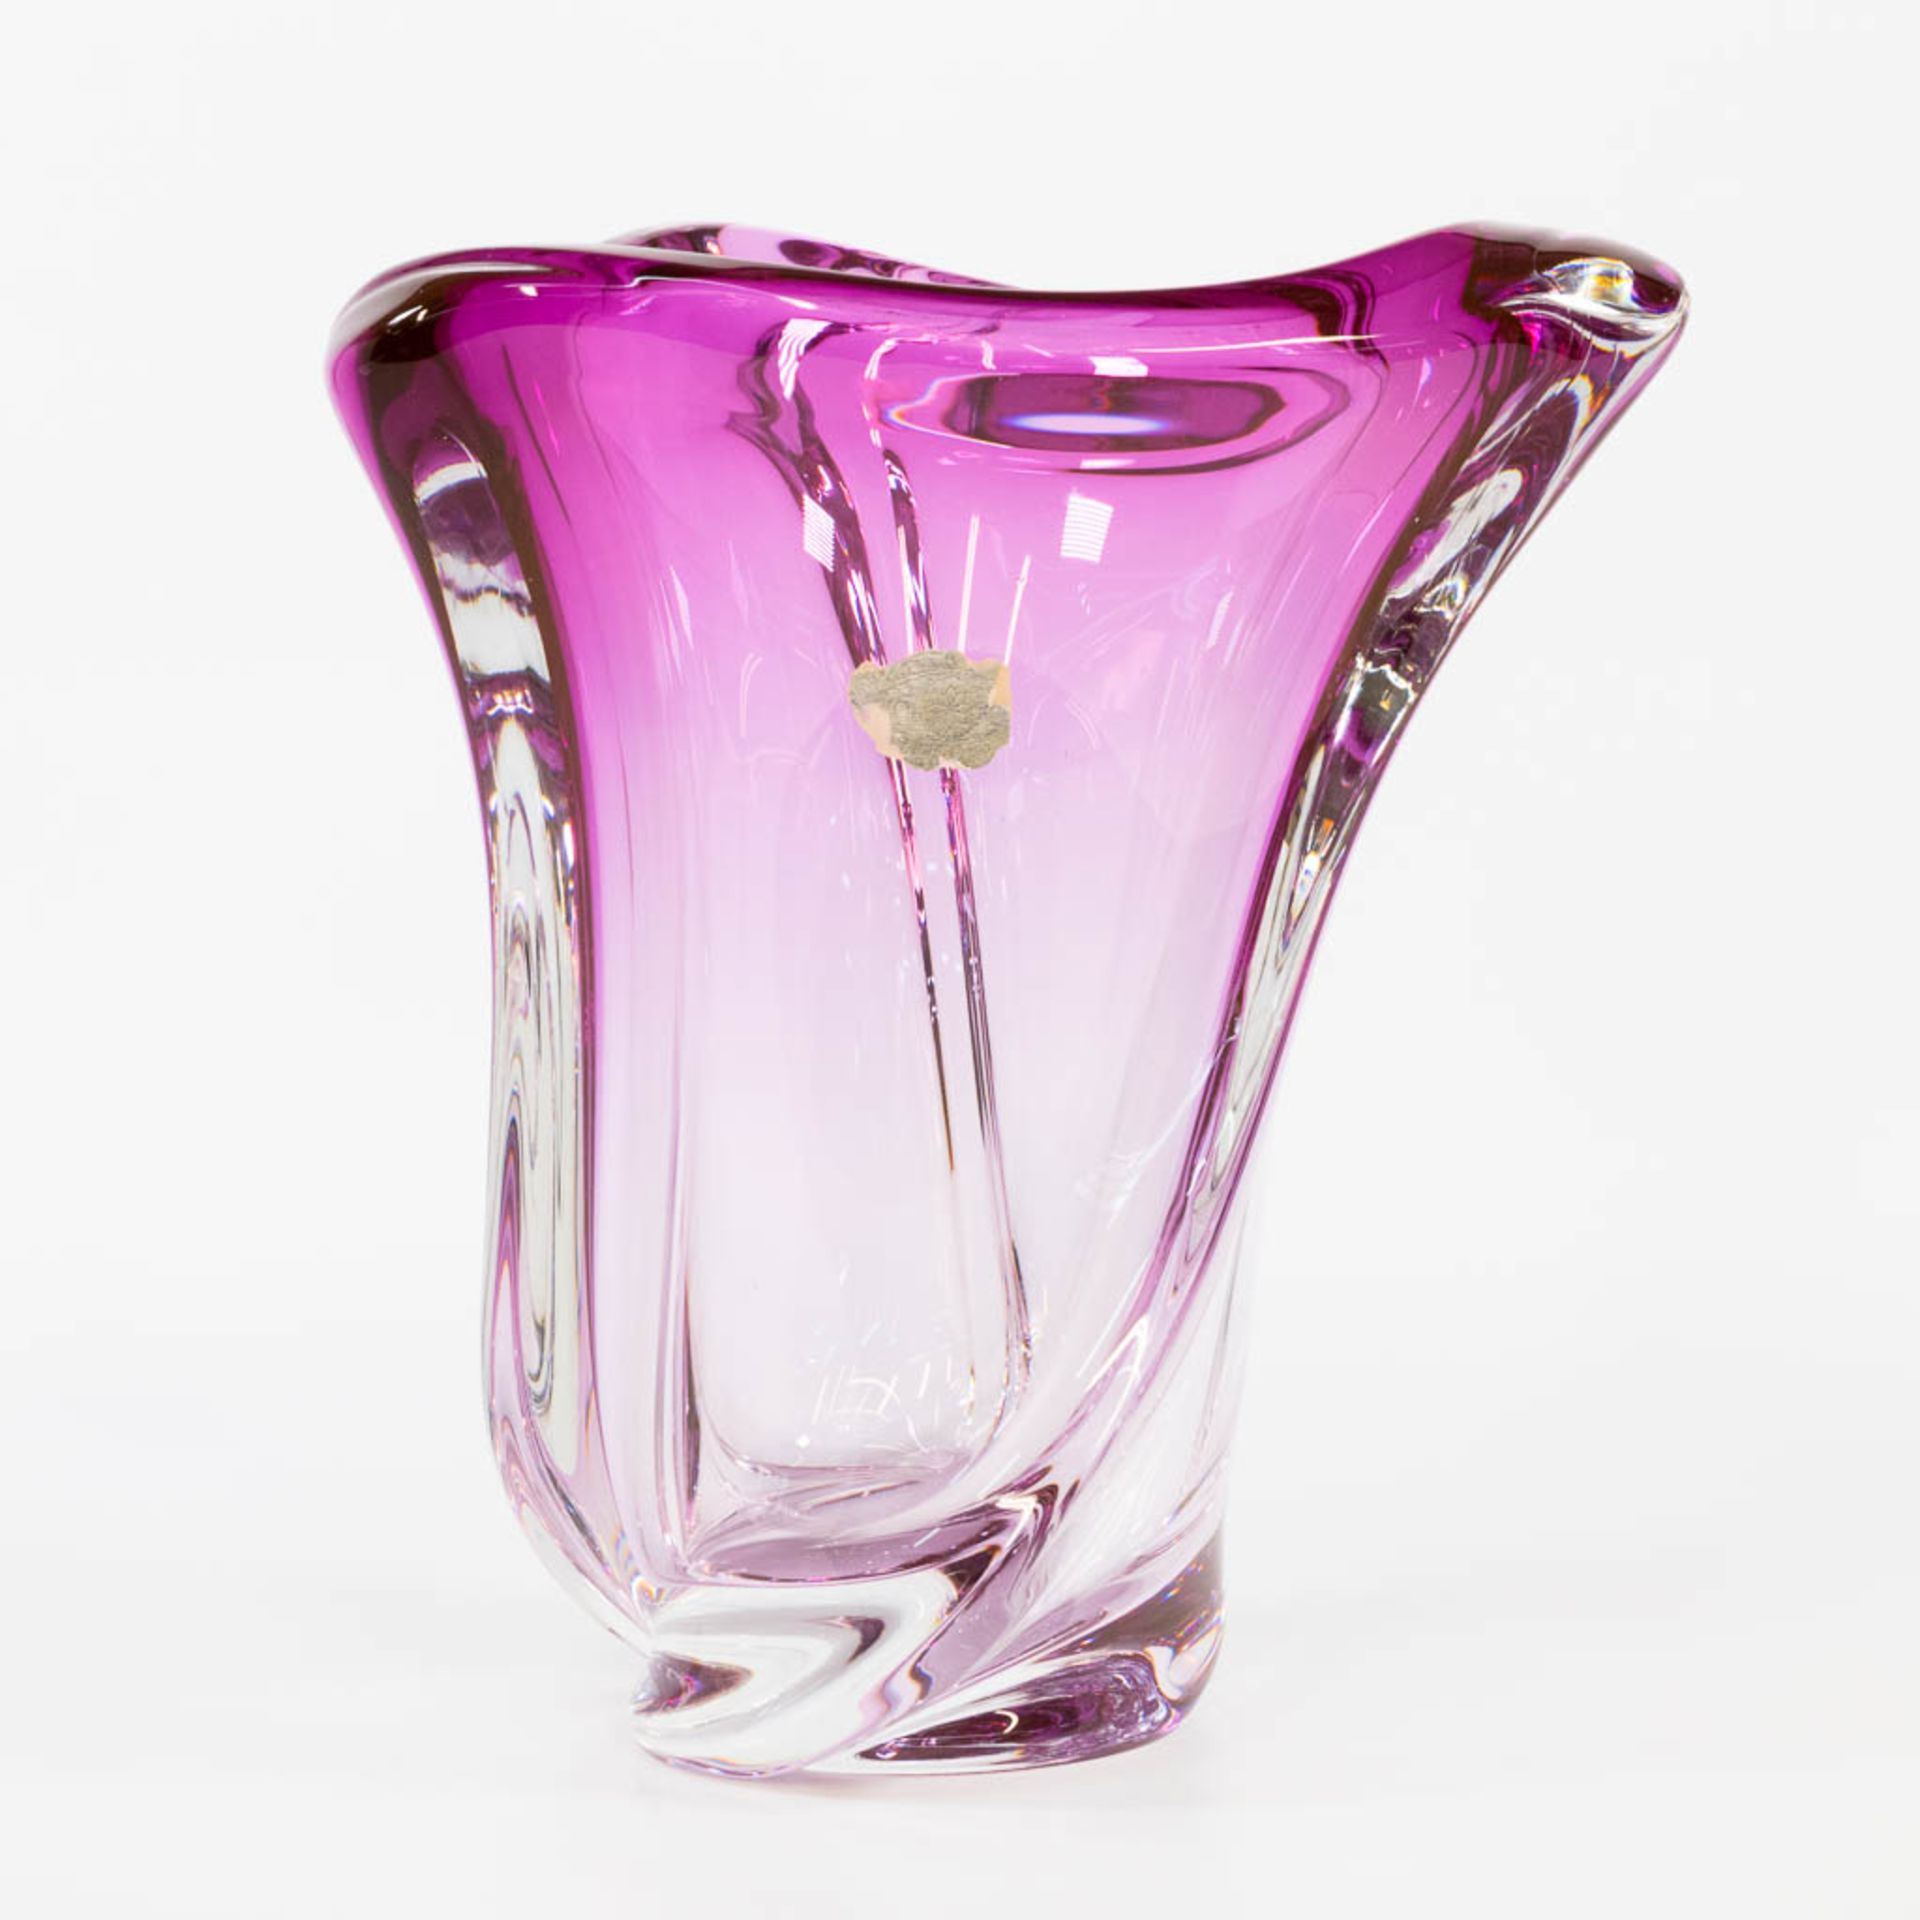 A large vase made of colored crystal. Marked Val Saint Lambert, and made in Belgium. (23 x 23 x 26 c